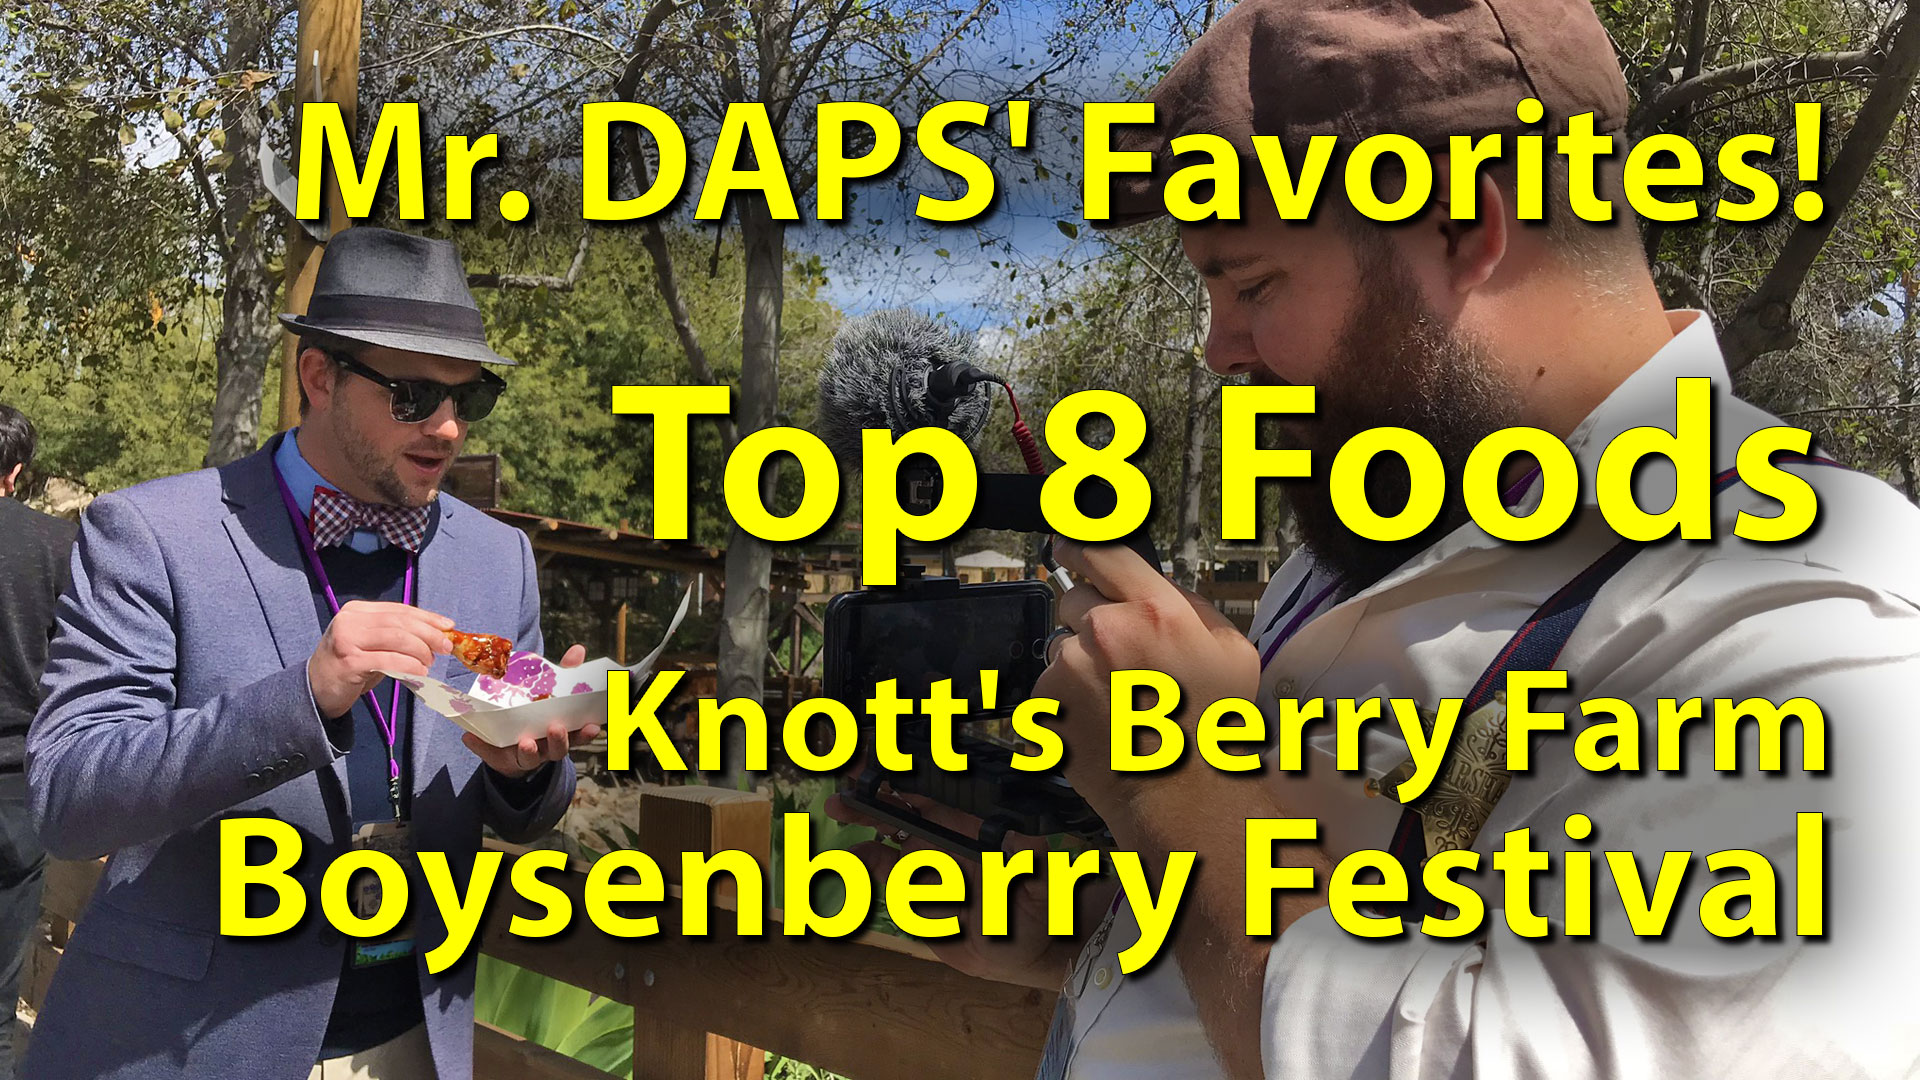 Mr. DAPS’ Favorites! – The Top 8 Foods at the Knott’s Berry Farm Boysenberry Festival